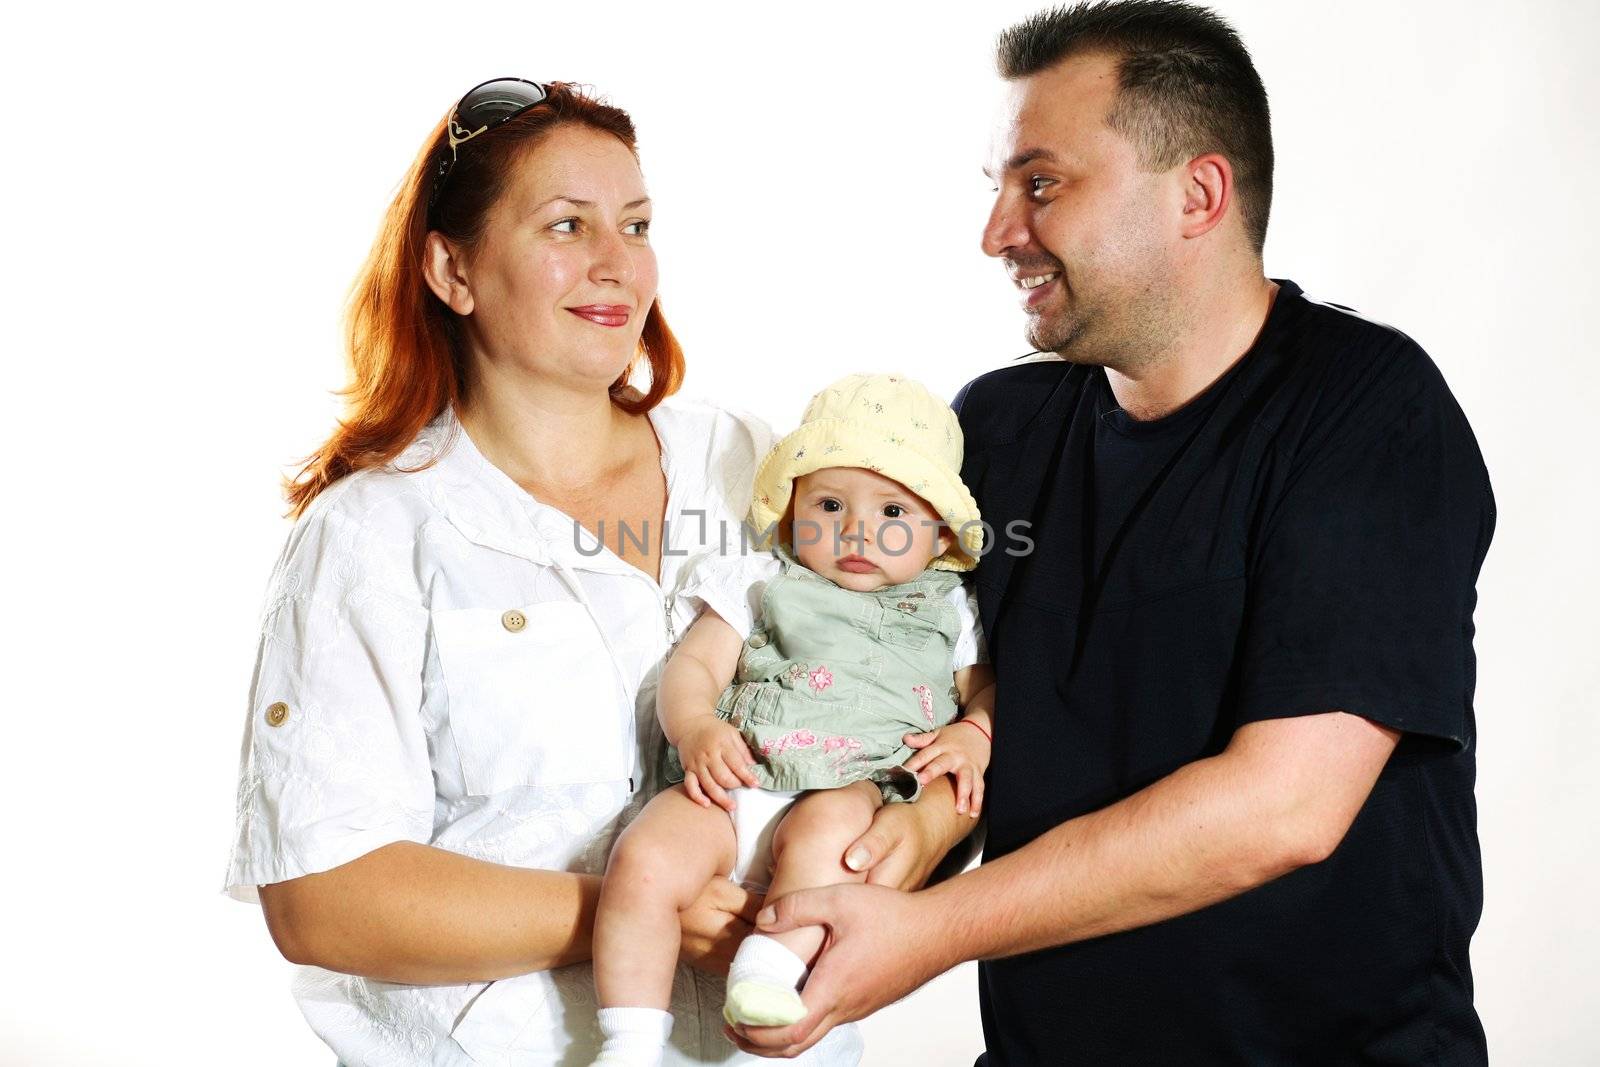 Family portrait in studio. Parents with a child.